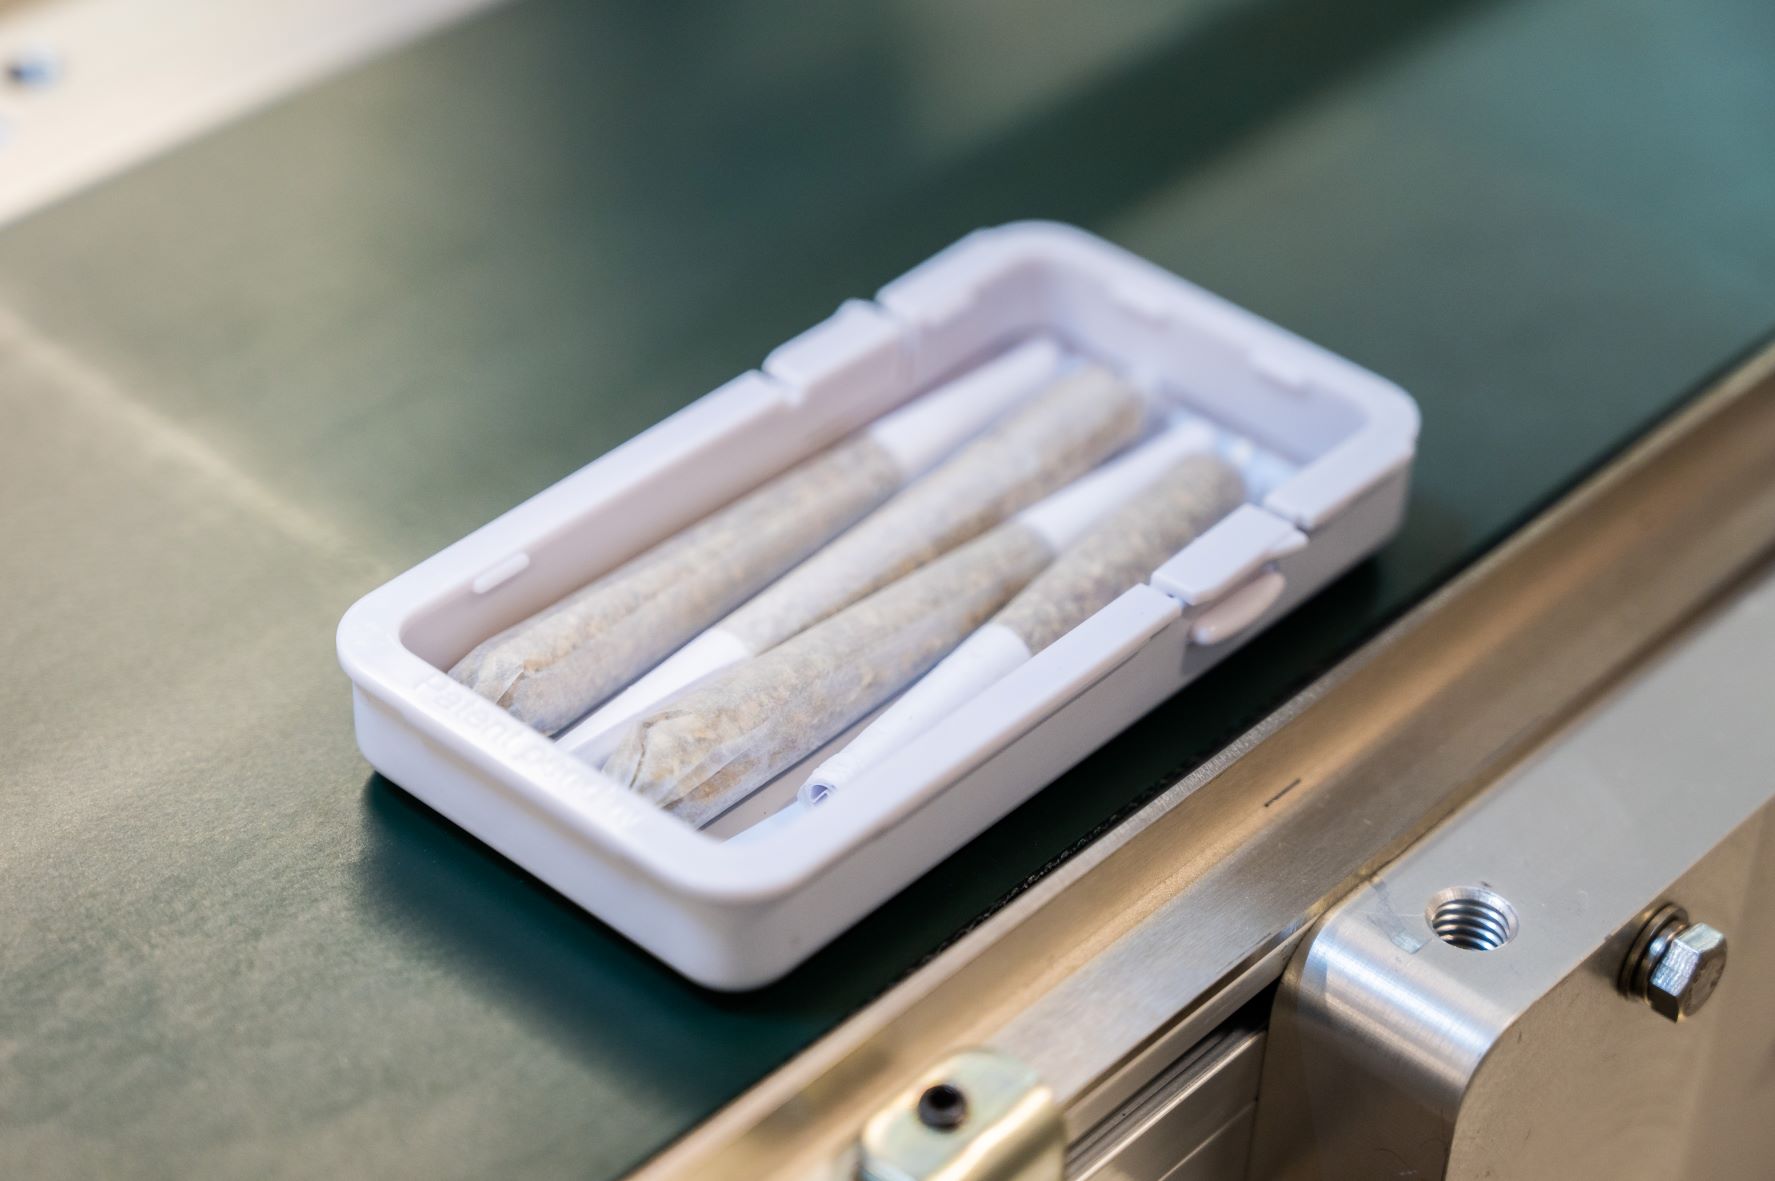 Placement of pre-rolled cannabis joints in a set configuration and orientation within a tray.